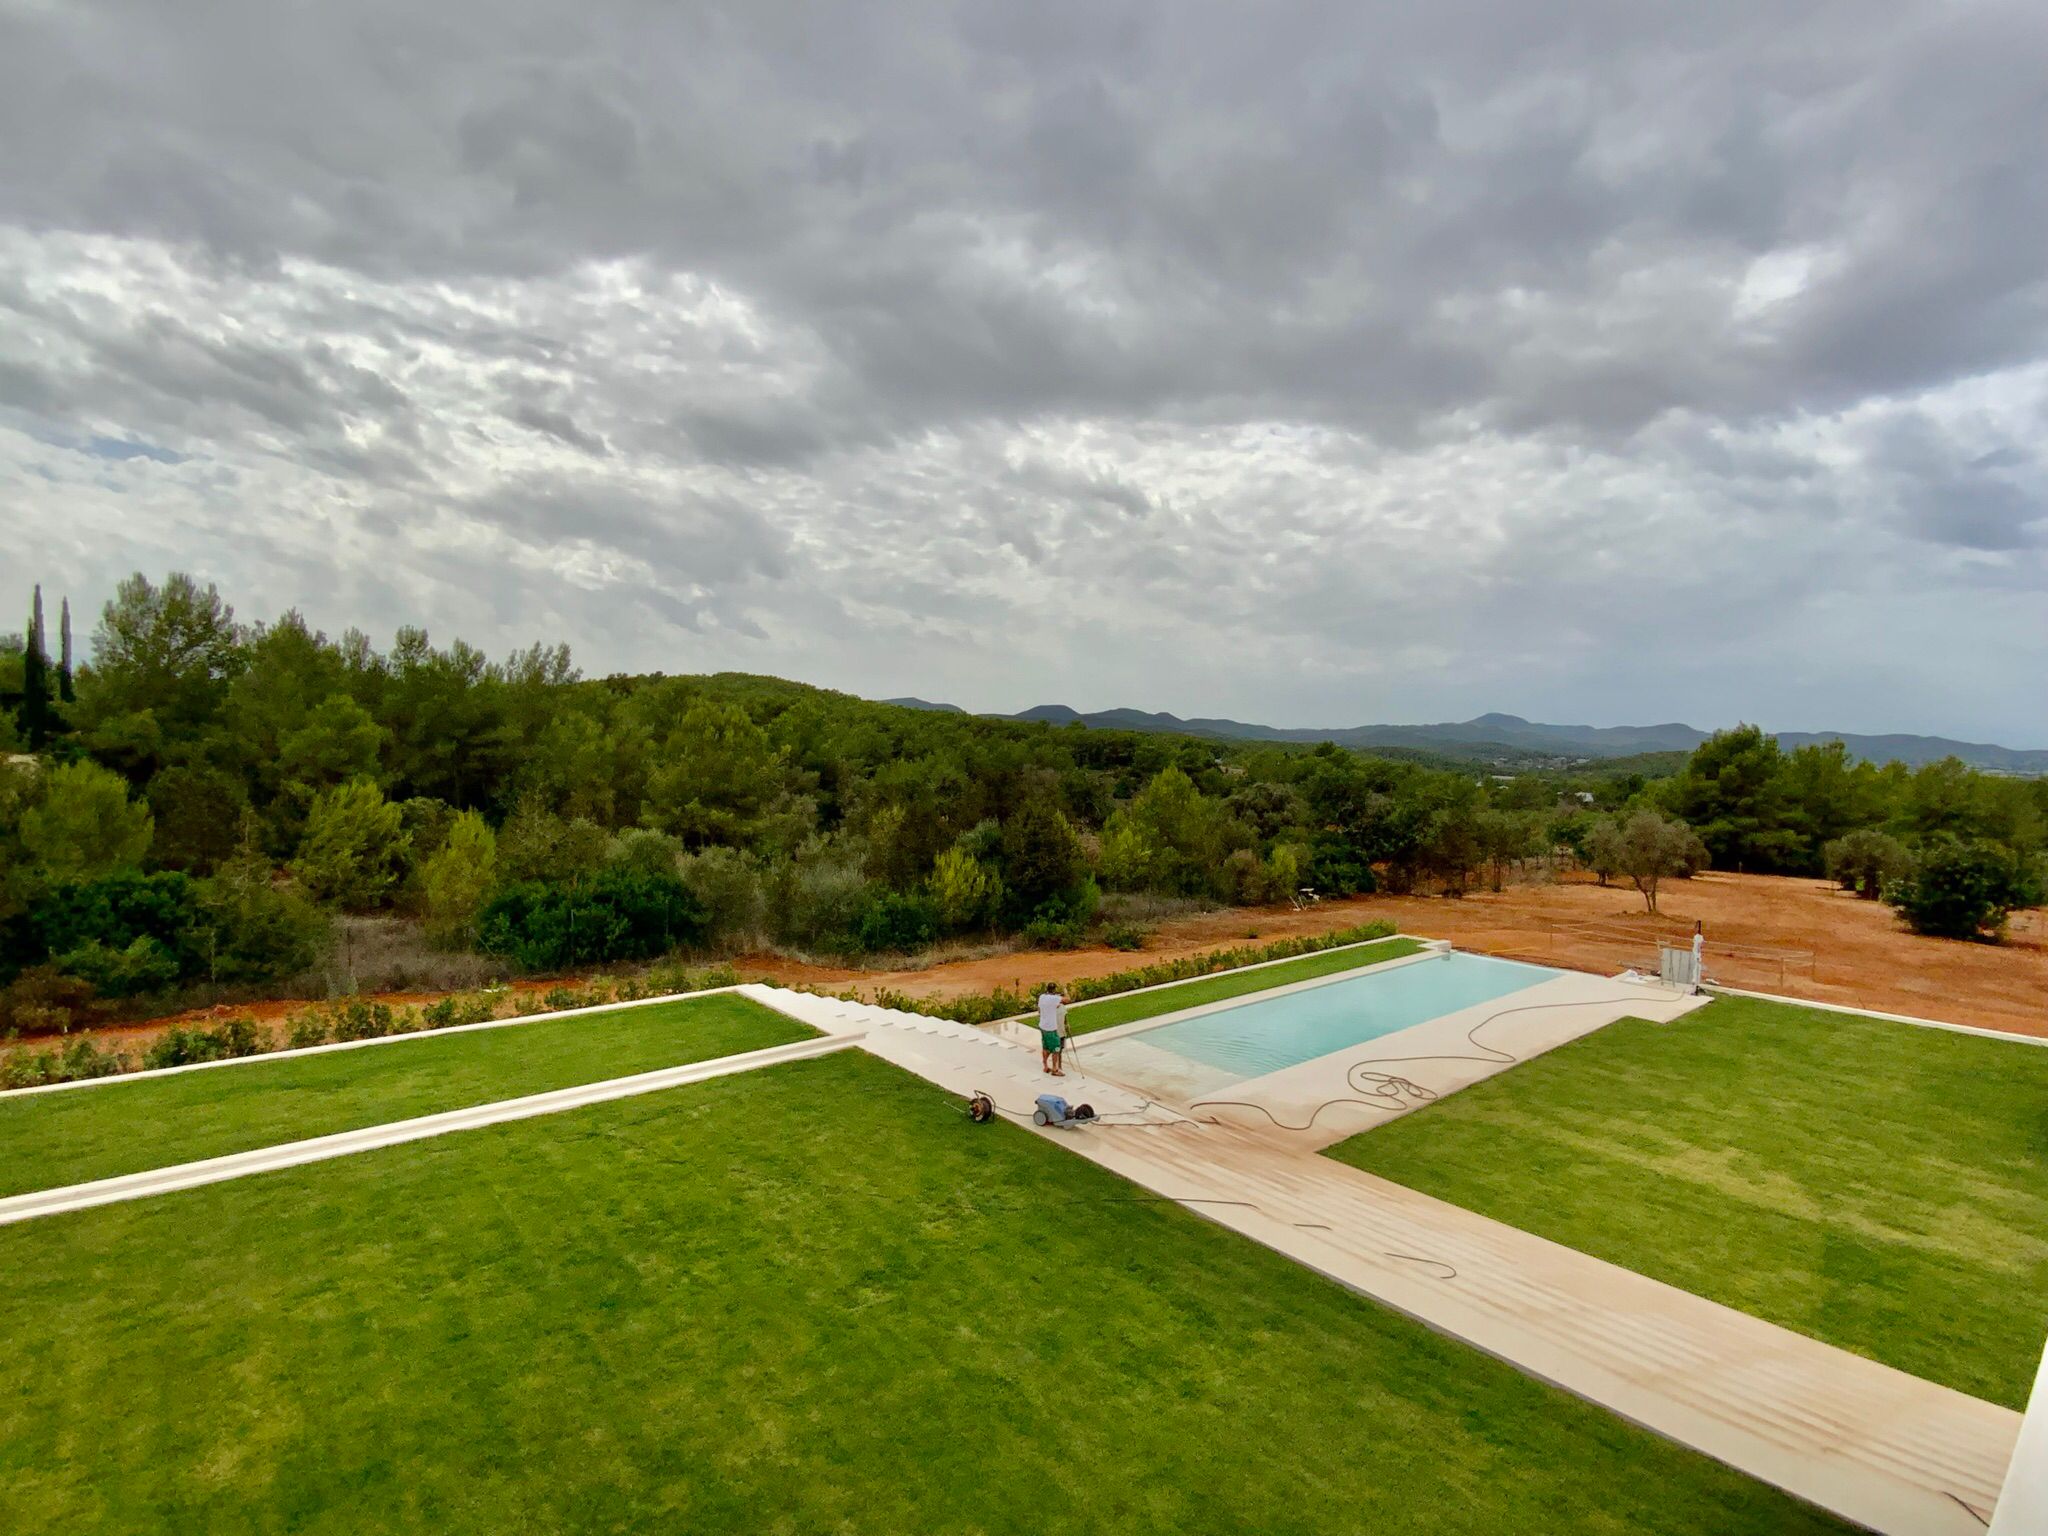 High end project land of 28,000m2 with a license for a house of 427m2 and a pool of 56m2